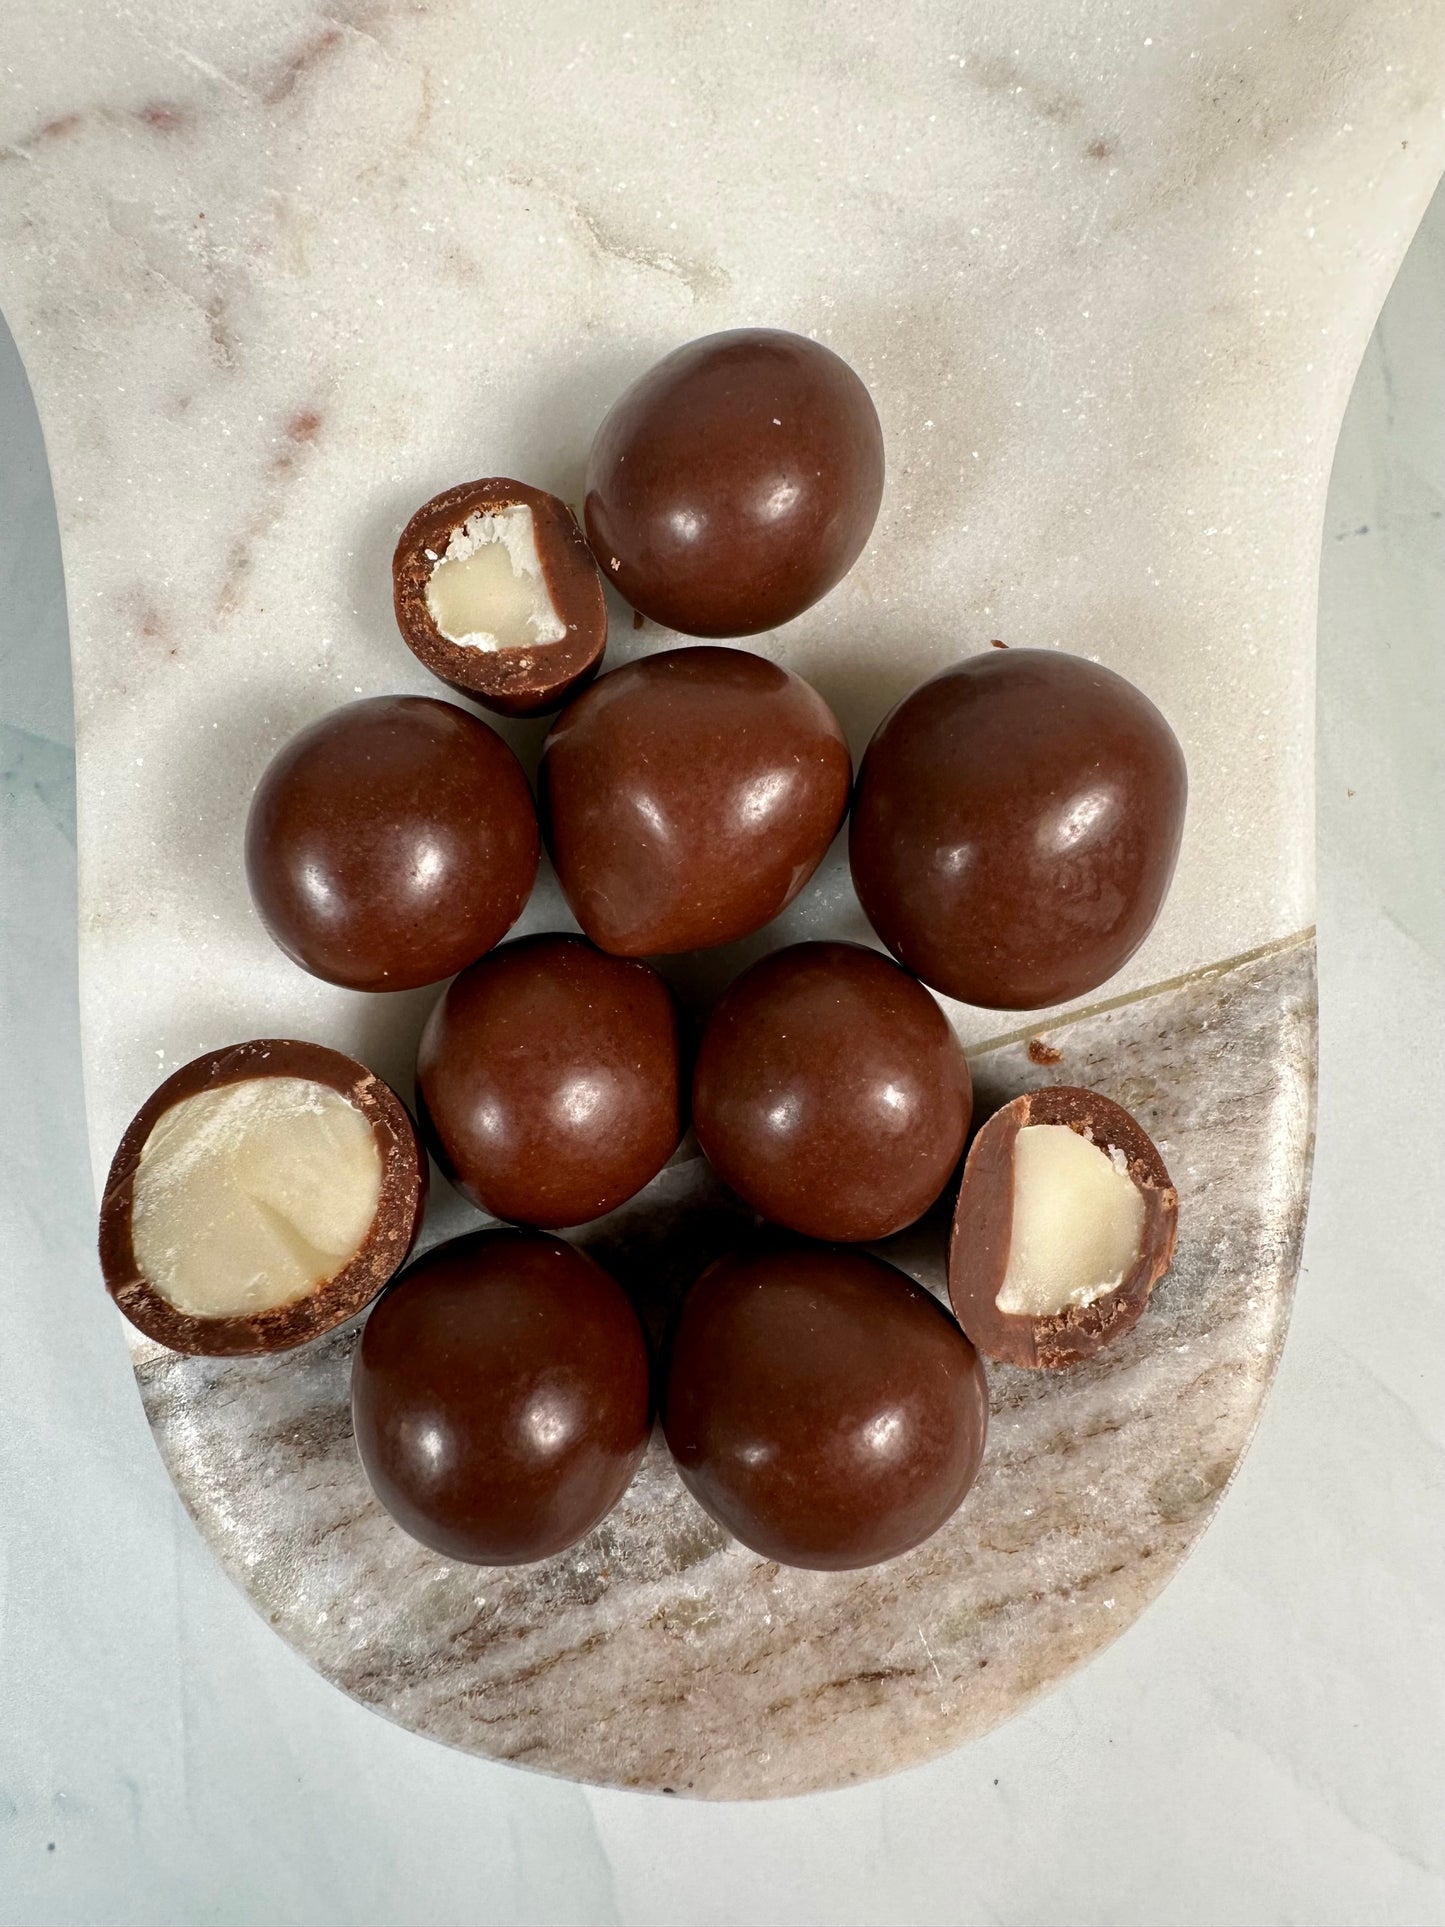  Delicious Oat Milk Chocolate Covered Macadamia Nuts